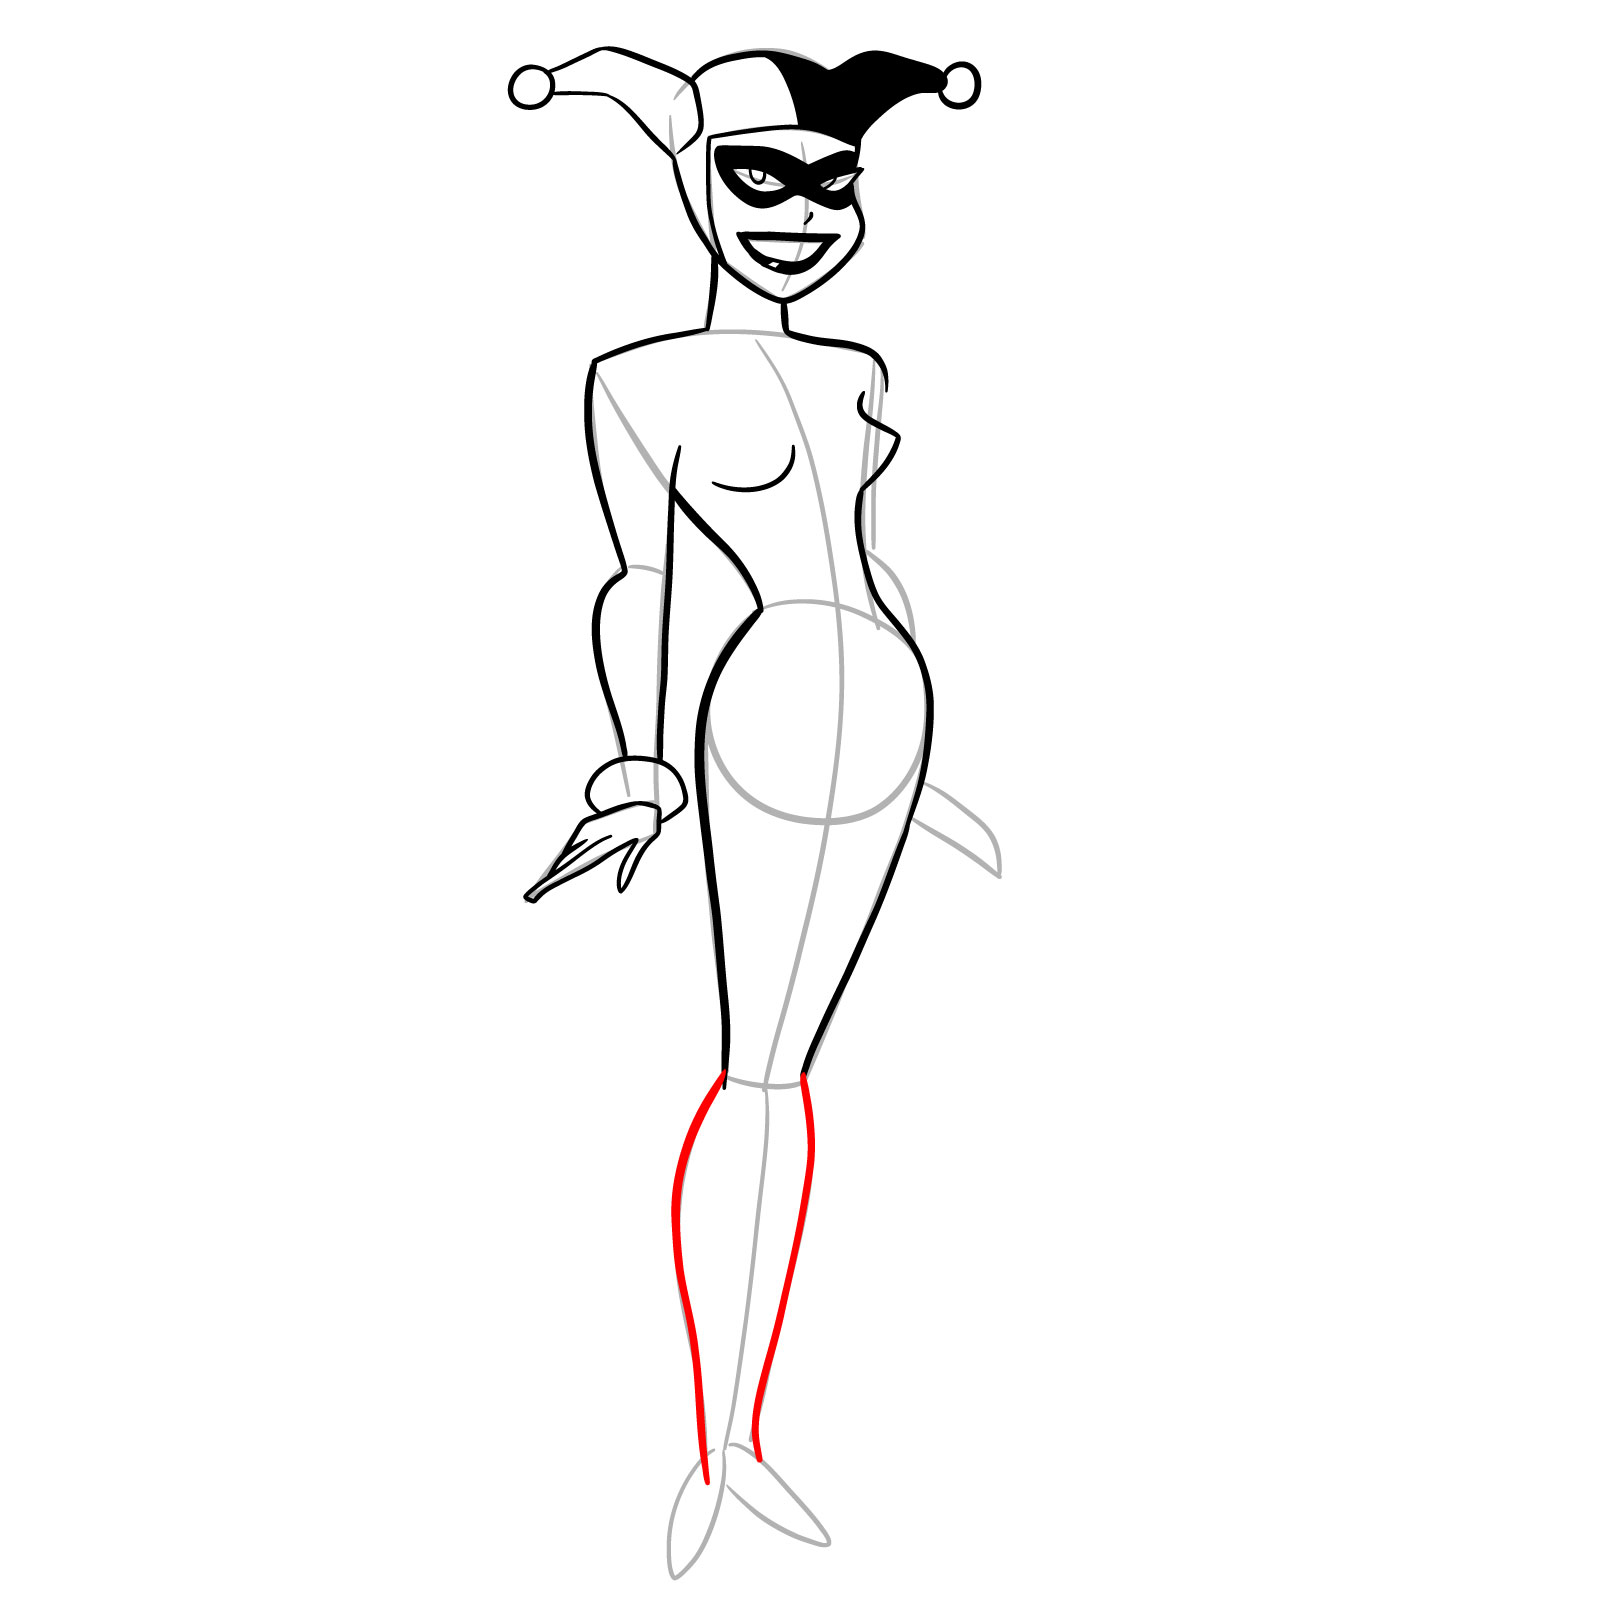 How to draw Harley Quinn in a classic suit - step 16